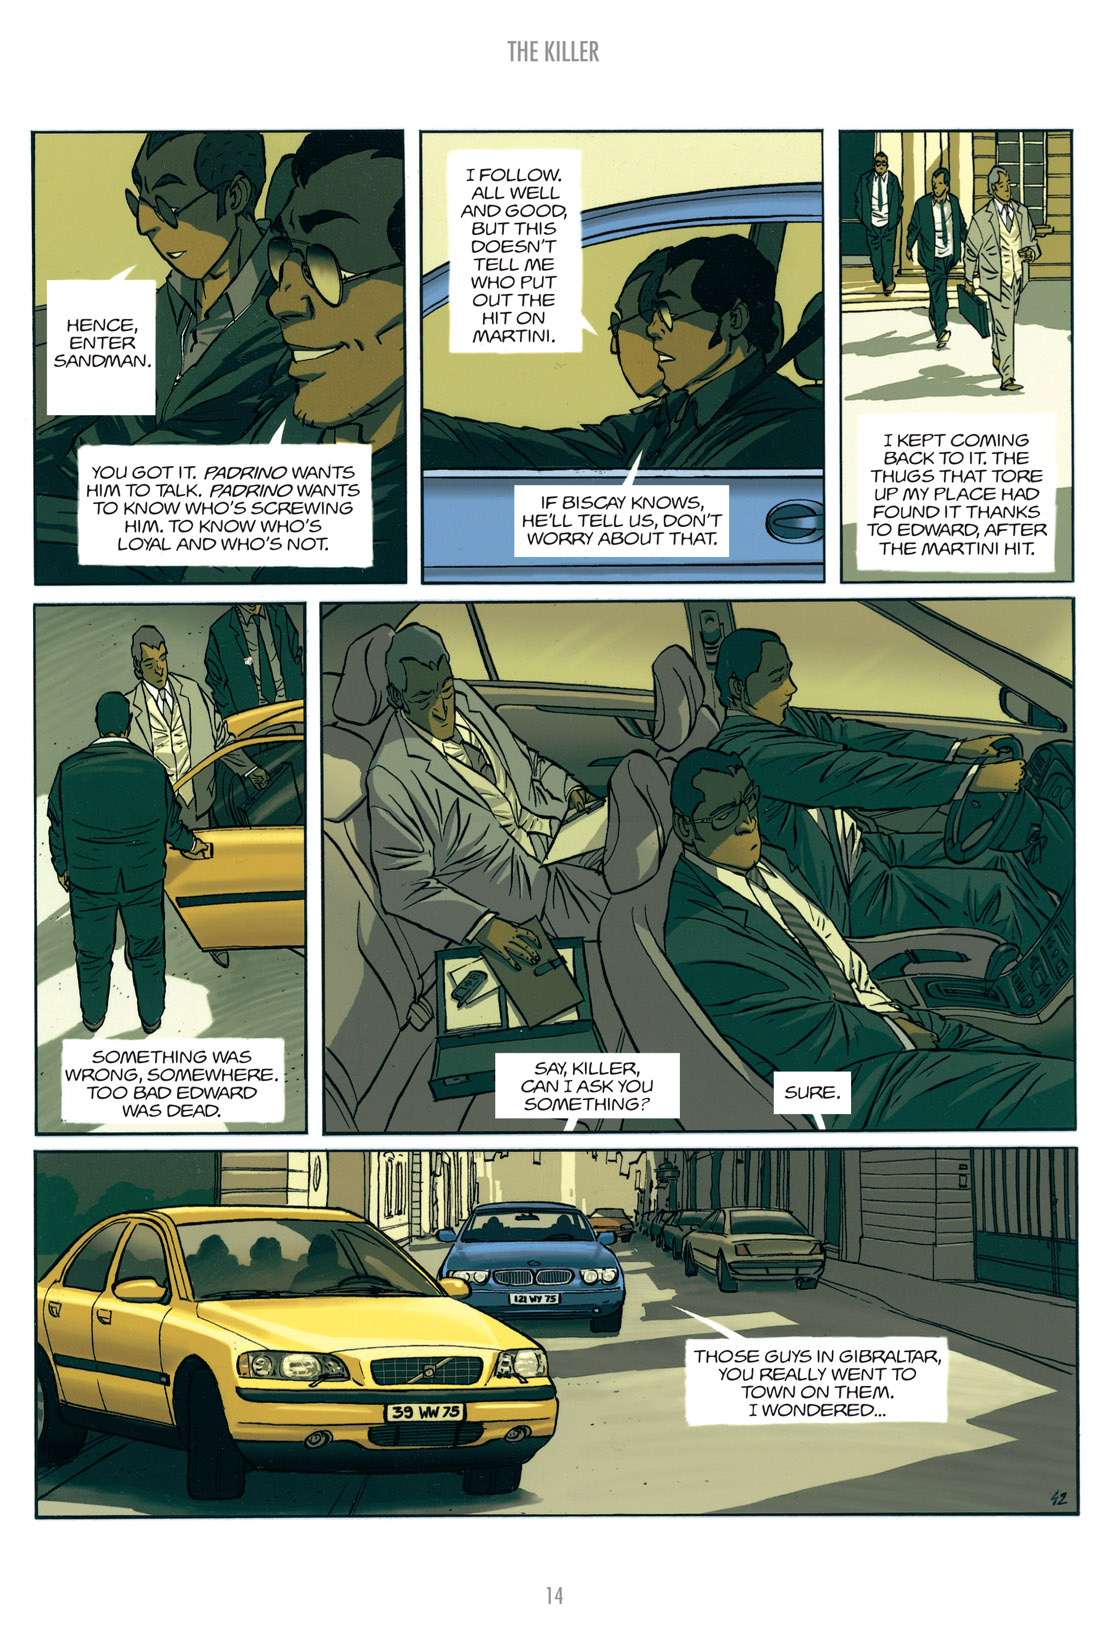 Read online The Killer comic -  Issue # TPB 2 - 113